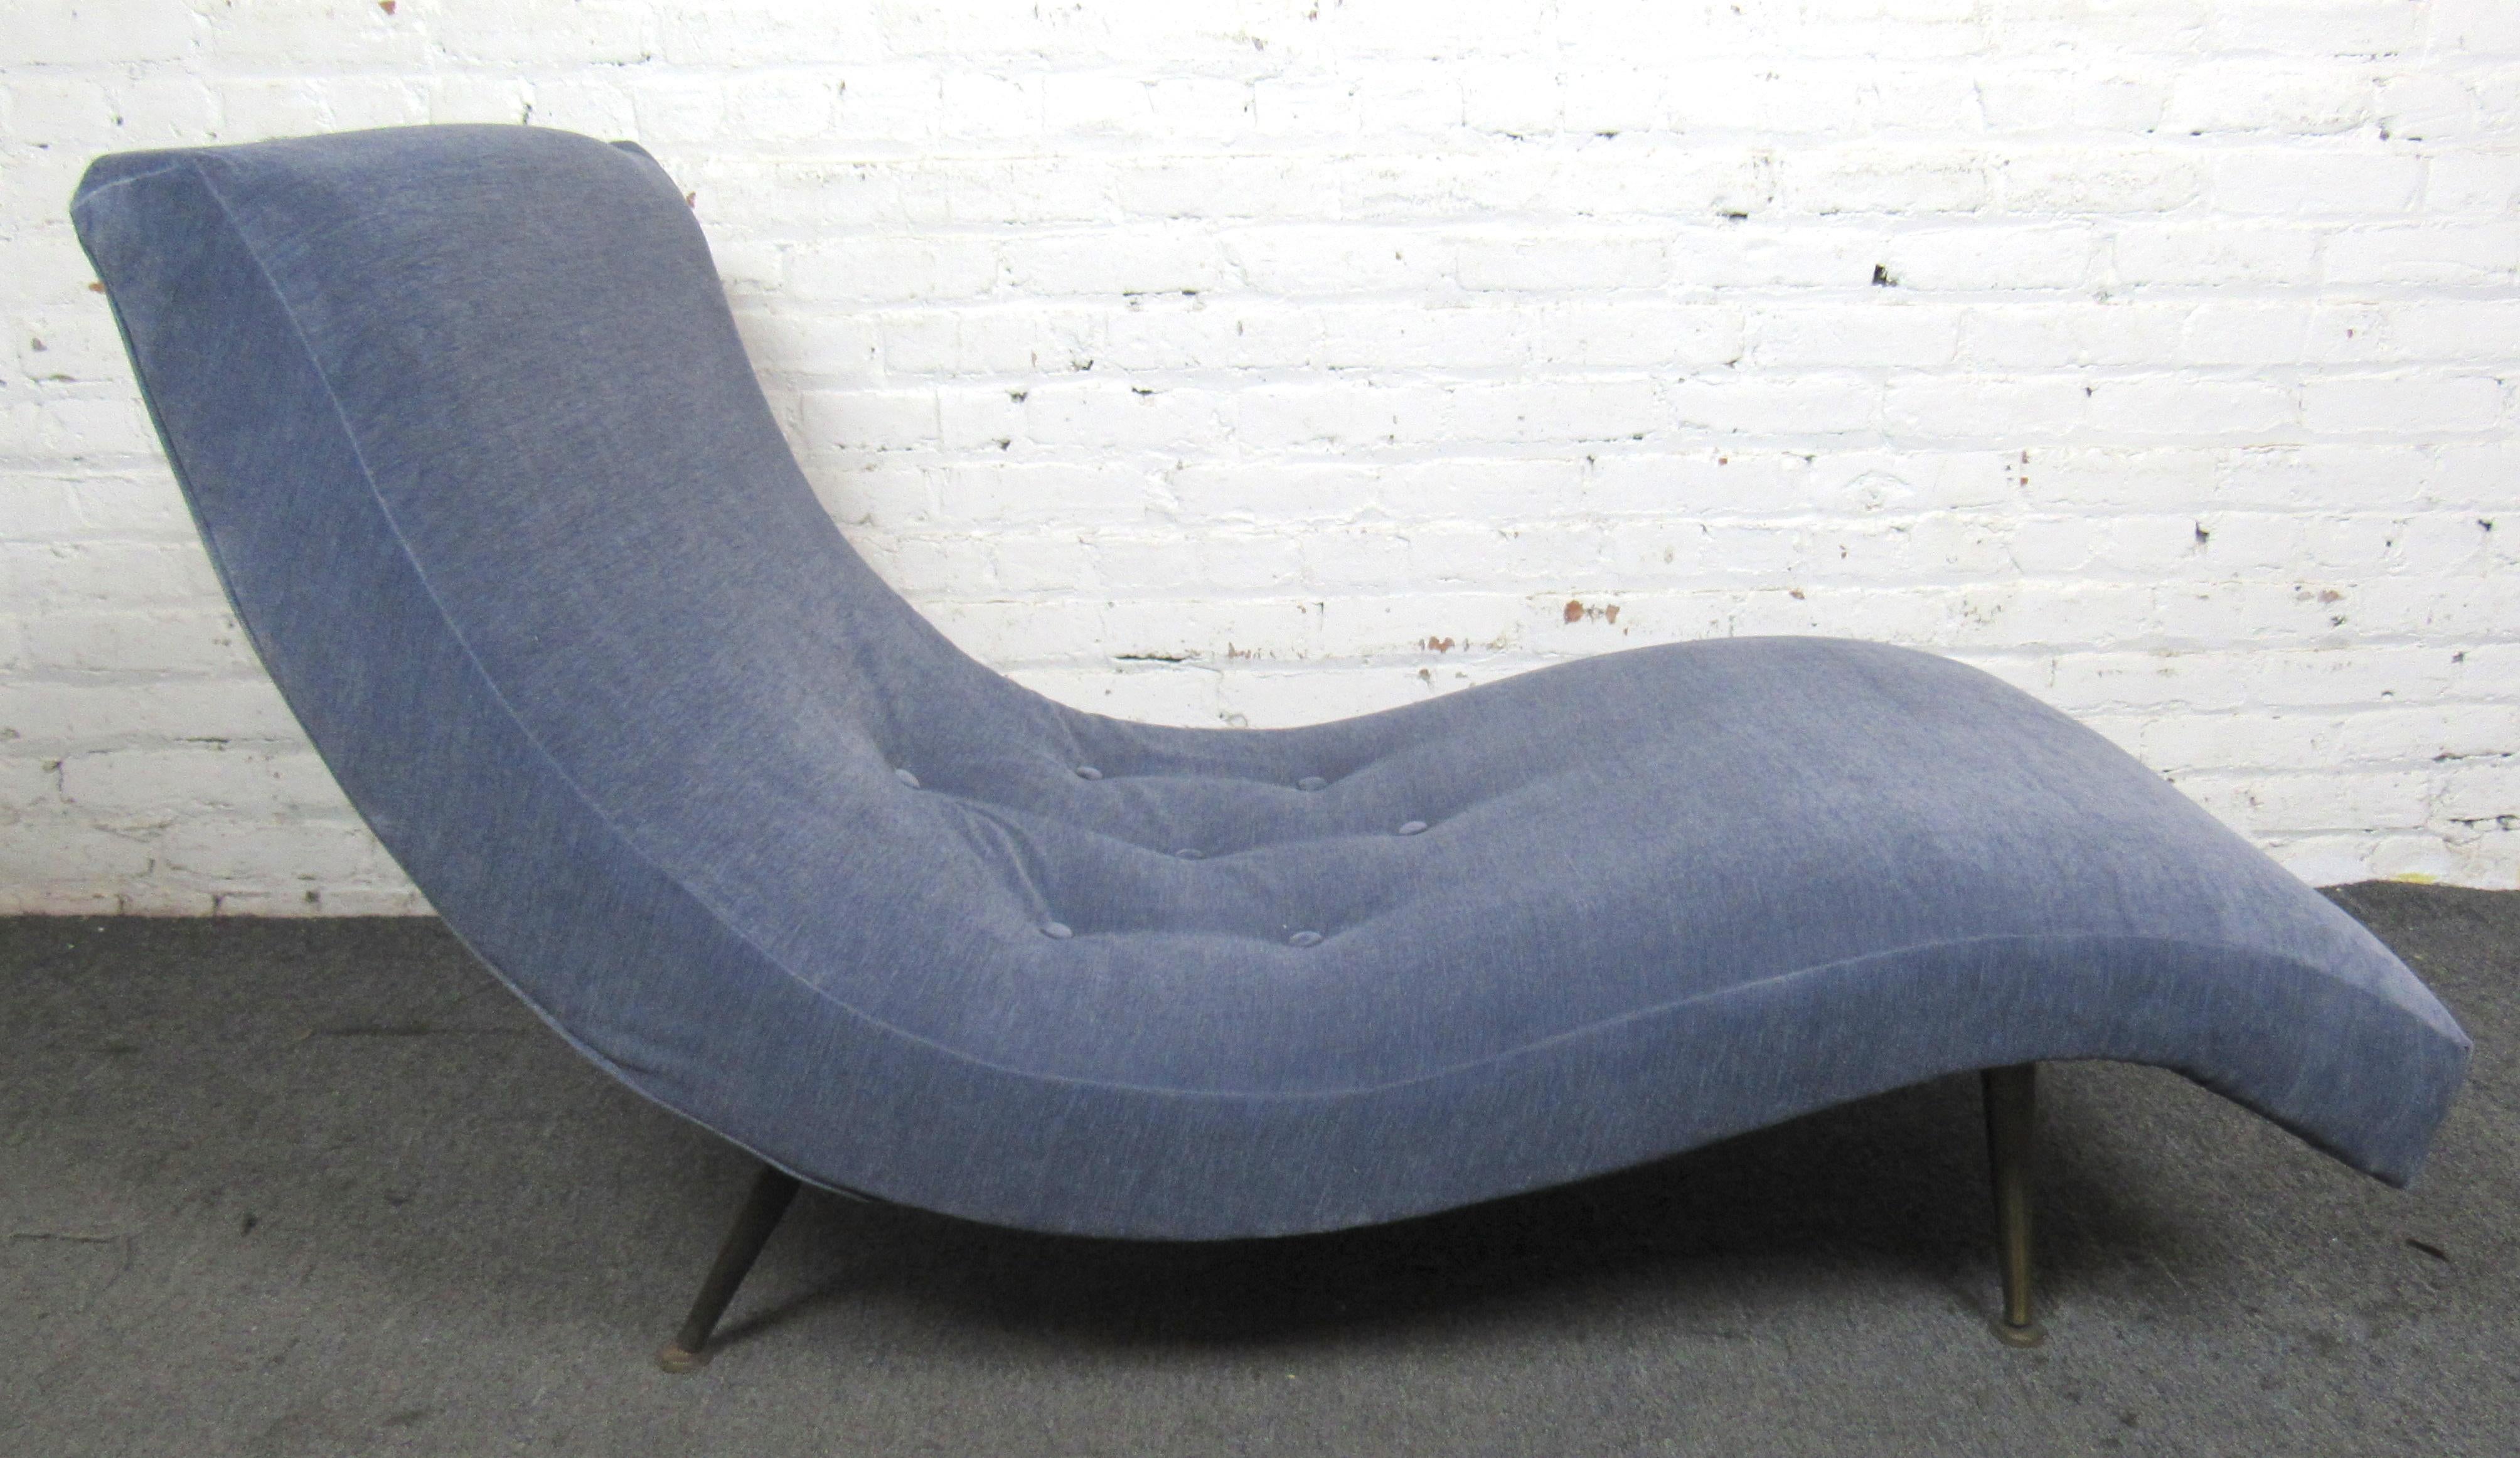 Bring home a mid-century modern legend with this vintage Adrian Pearsall design. The wavy silhouette is sure to bring the rest and relaxation of the beach into your living room.  Reupholstered by its last owner, this robust chaise is sure to hold up